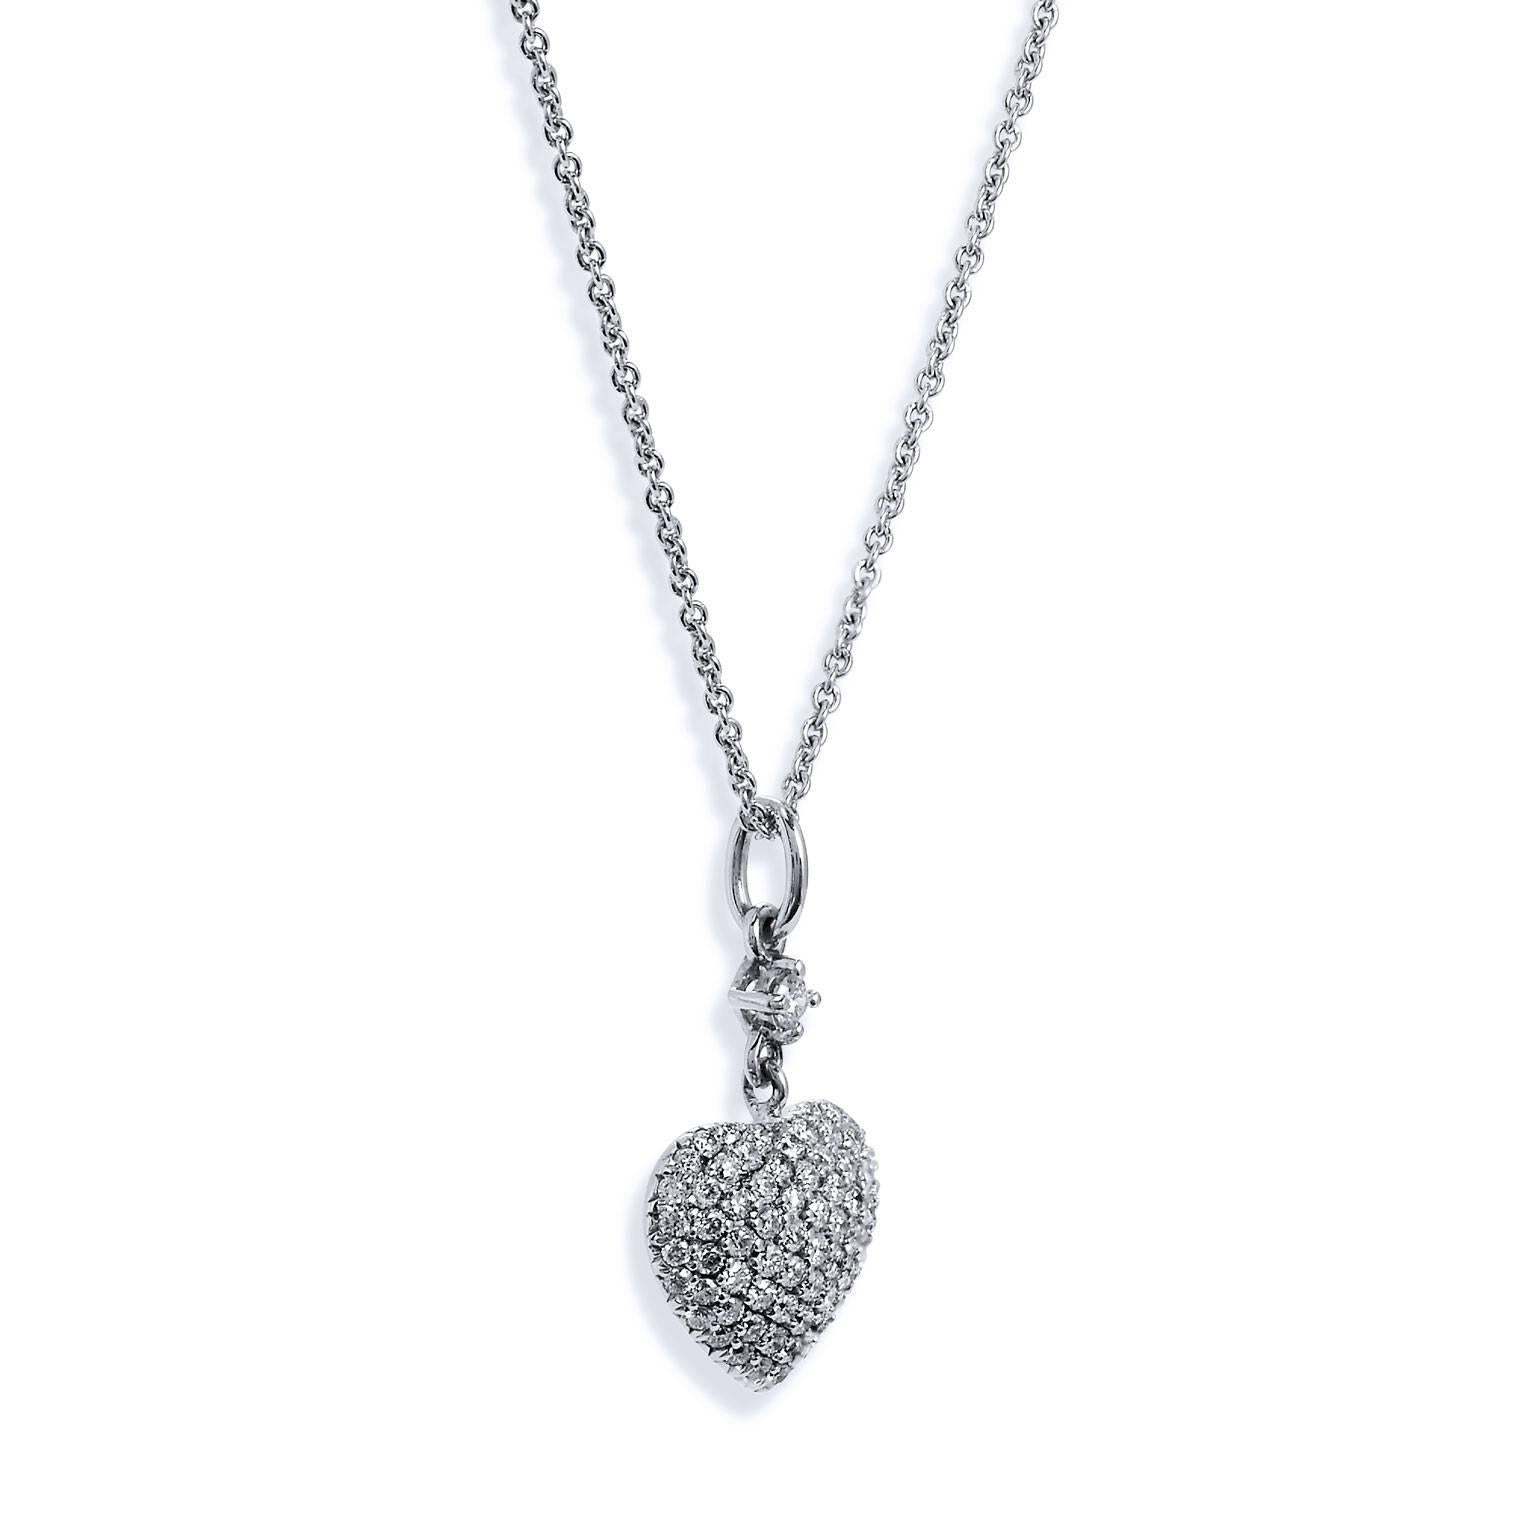 An H and H original design, this handmade 18 karat white gold pendant features seventy-five pieces of diamond with a total weight of 0.55 carat. Seventy-four pieces of diamond are pave set the expanse of the heart, while one diamond is prong set as